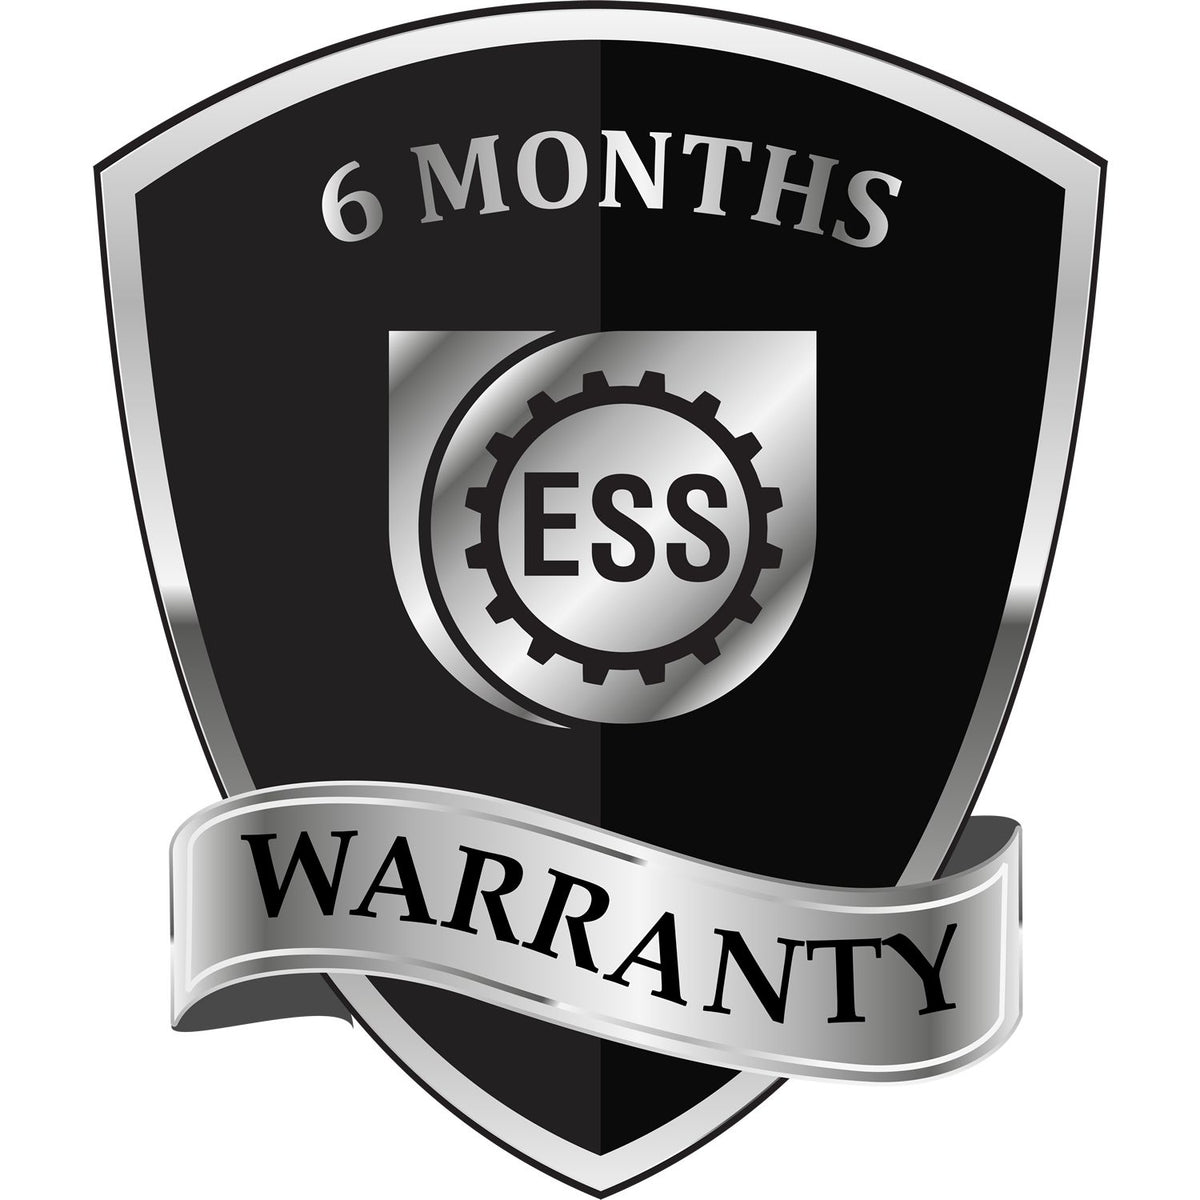 A badge or emblem showing a warranty icon for the PSI Missouri Notary Stamp